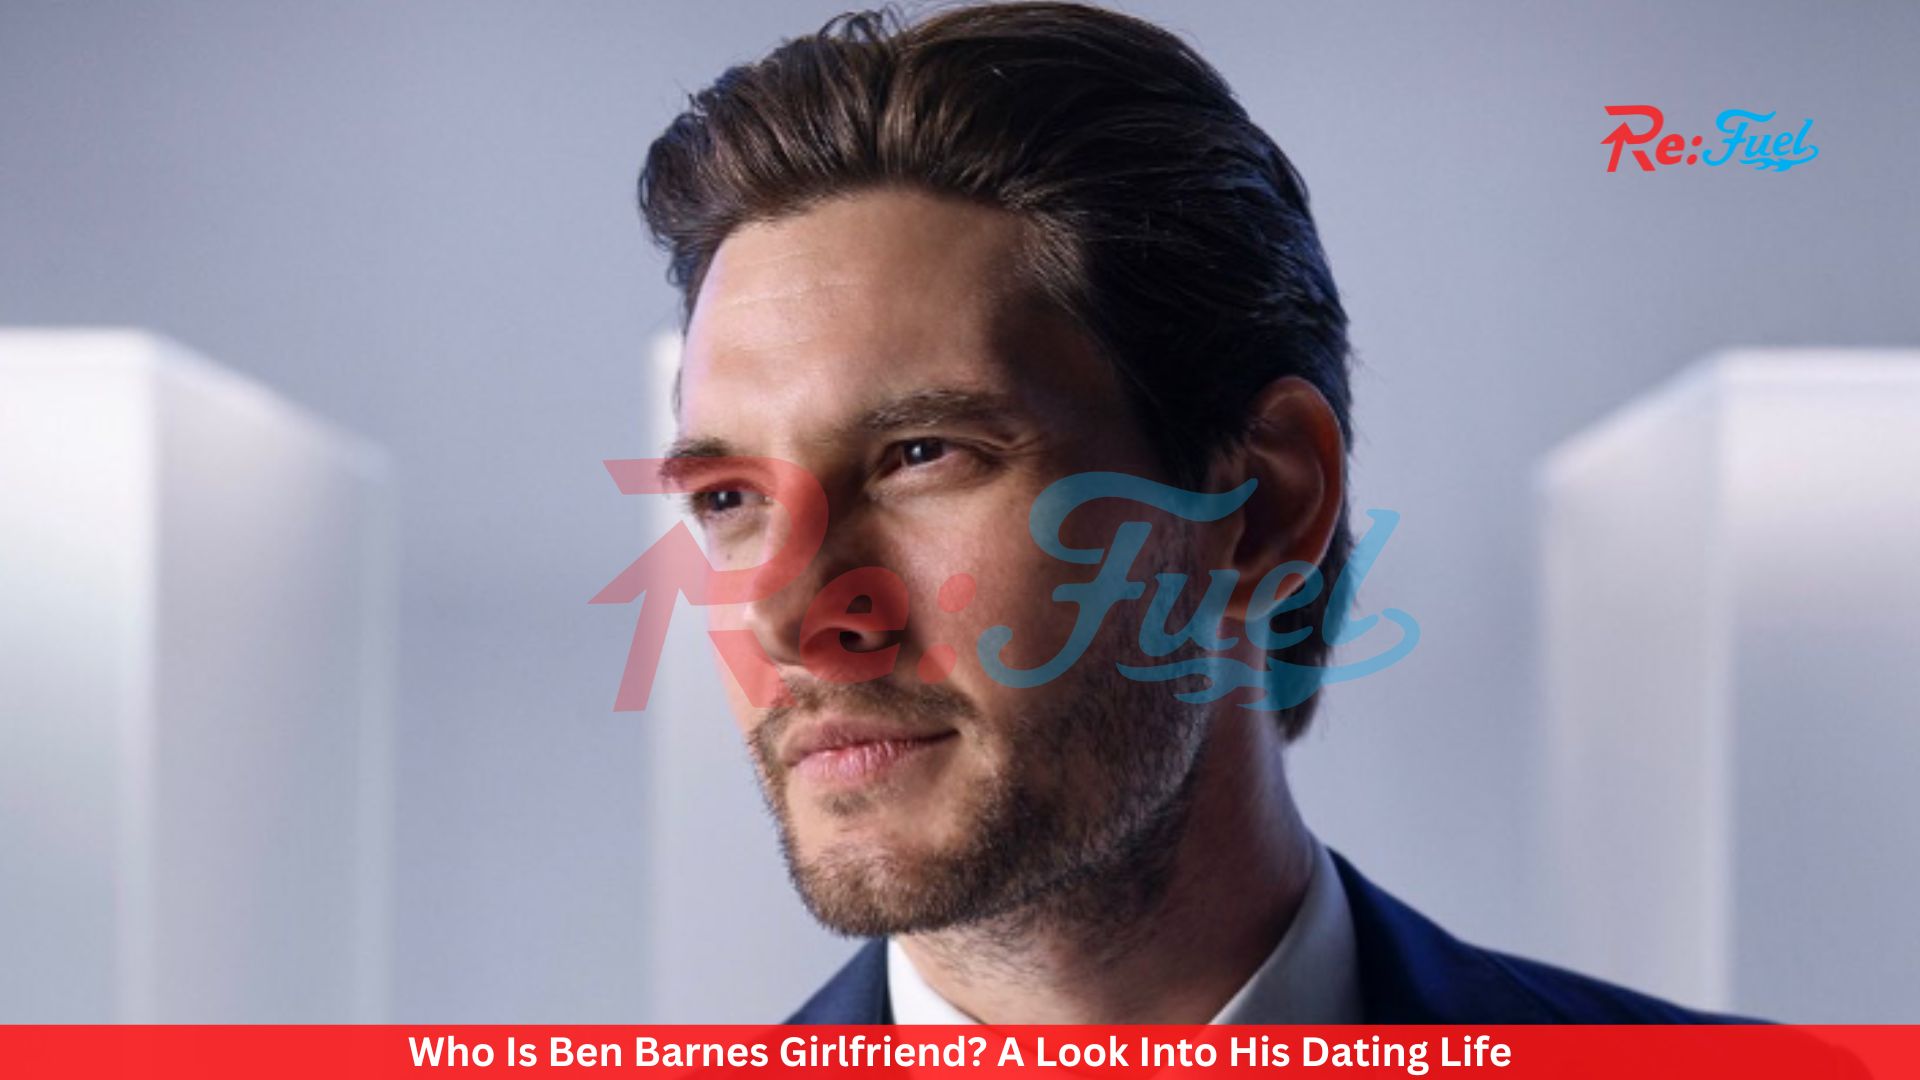 Who Is Ben Barnes Girlfriend? A Look Into His Dating Life